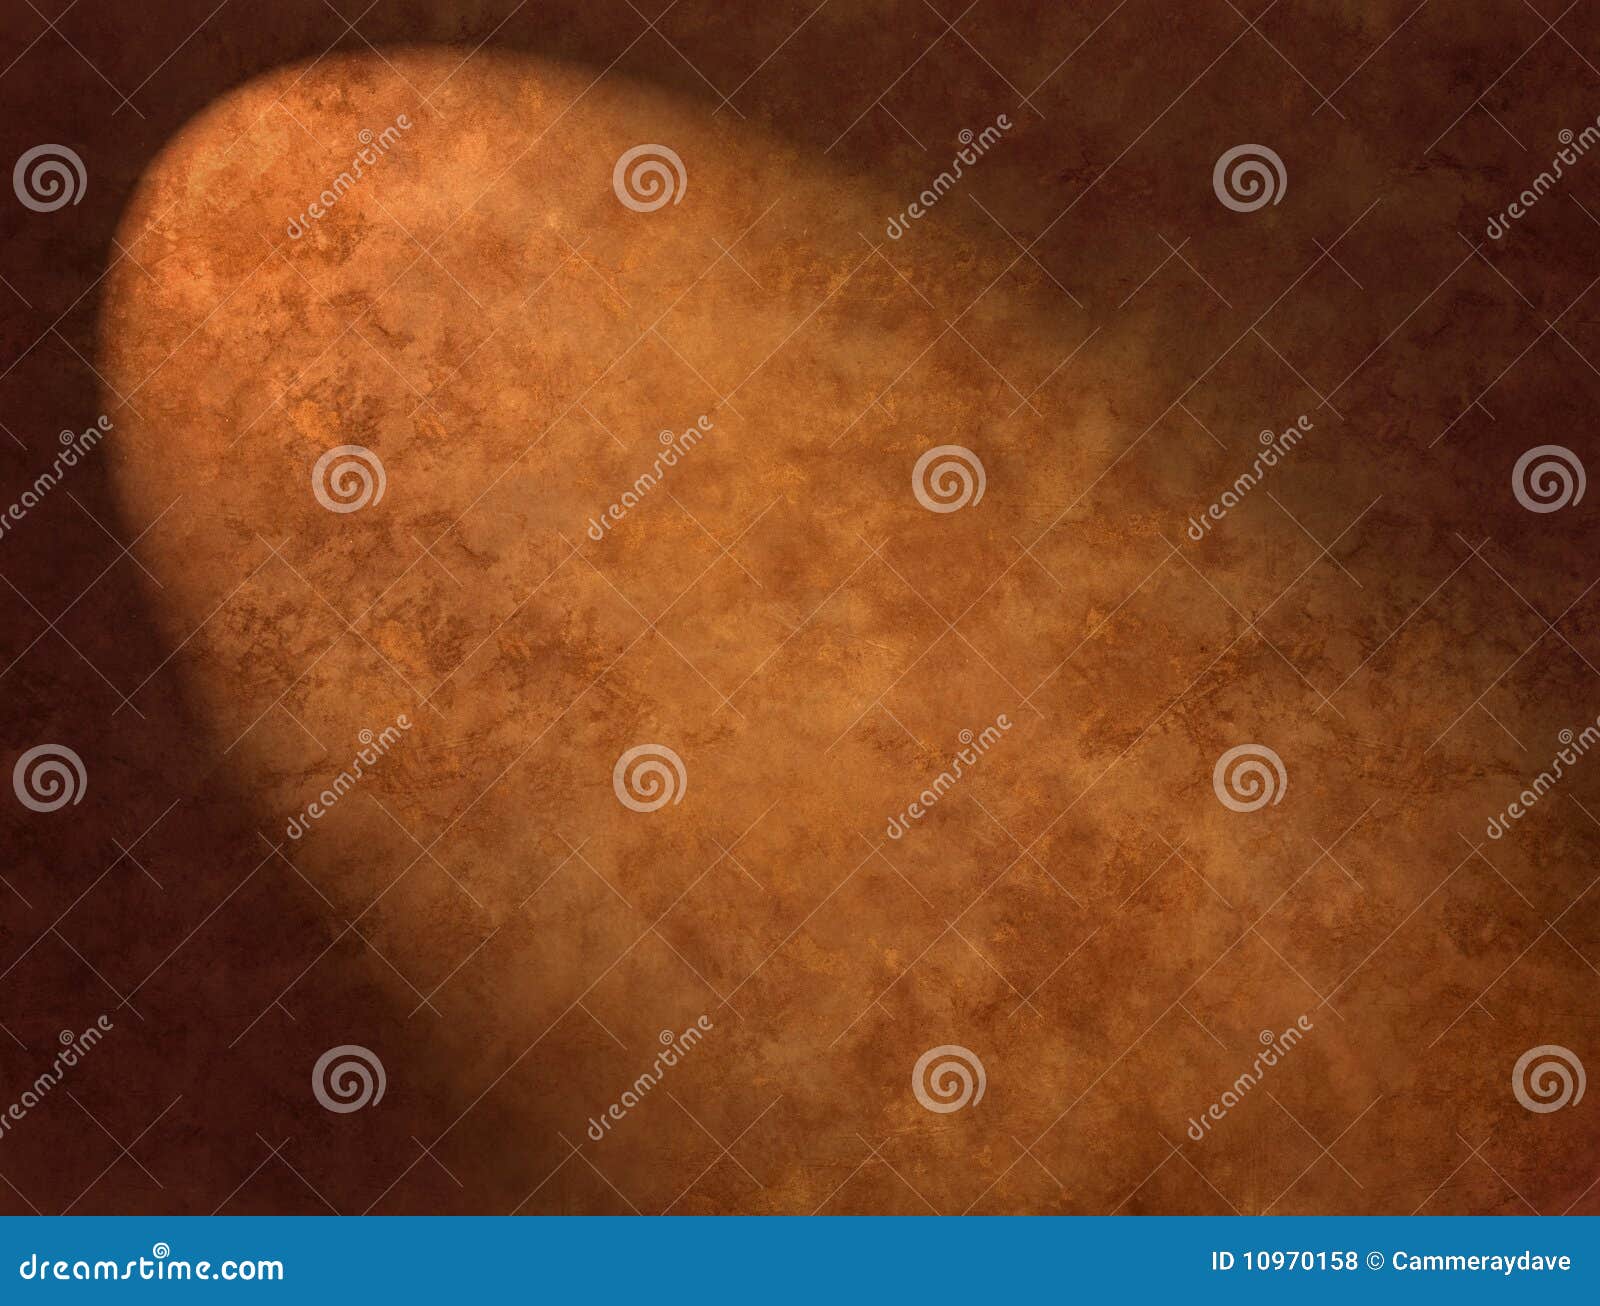 abstract spotlight brown background